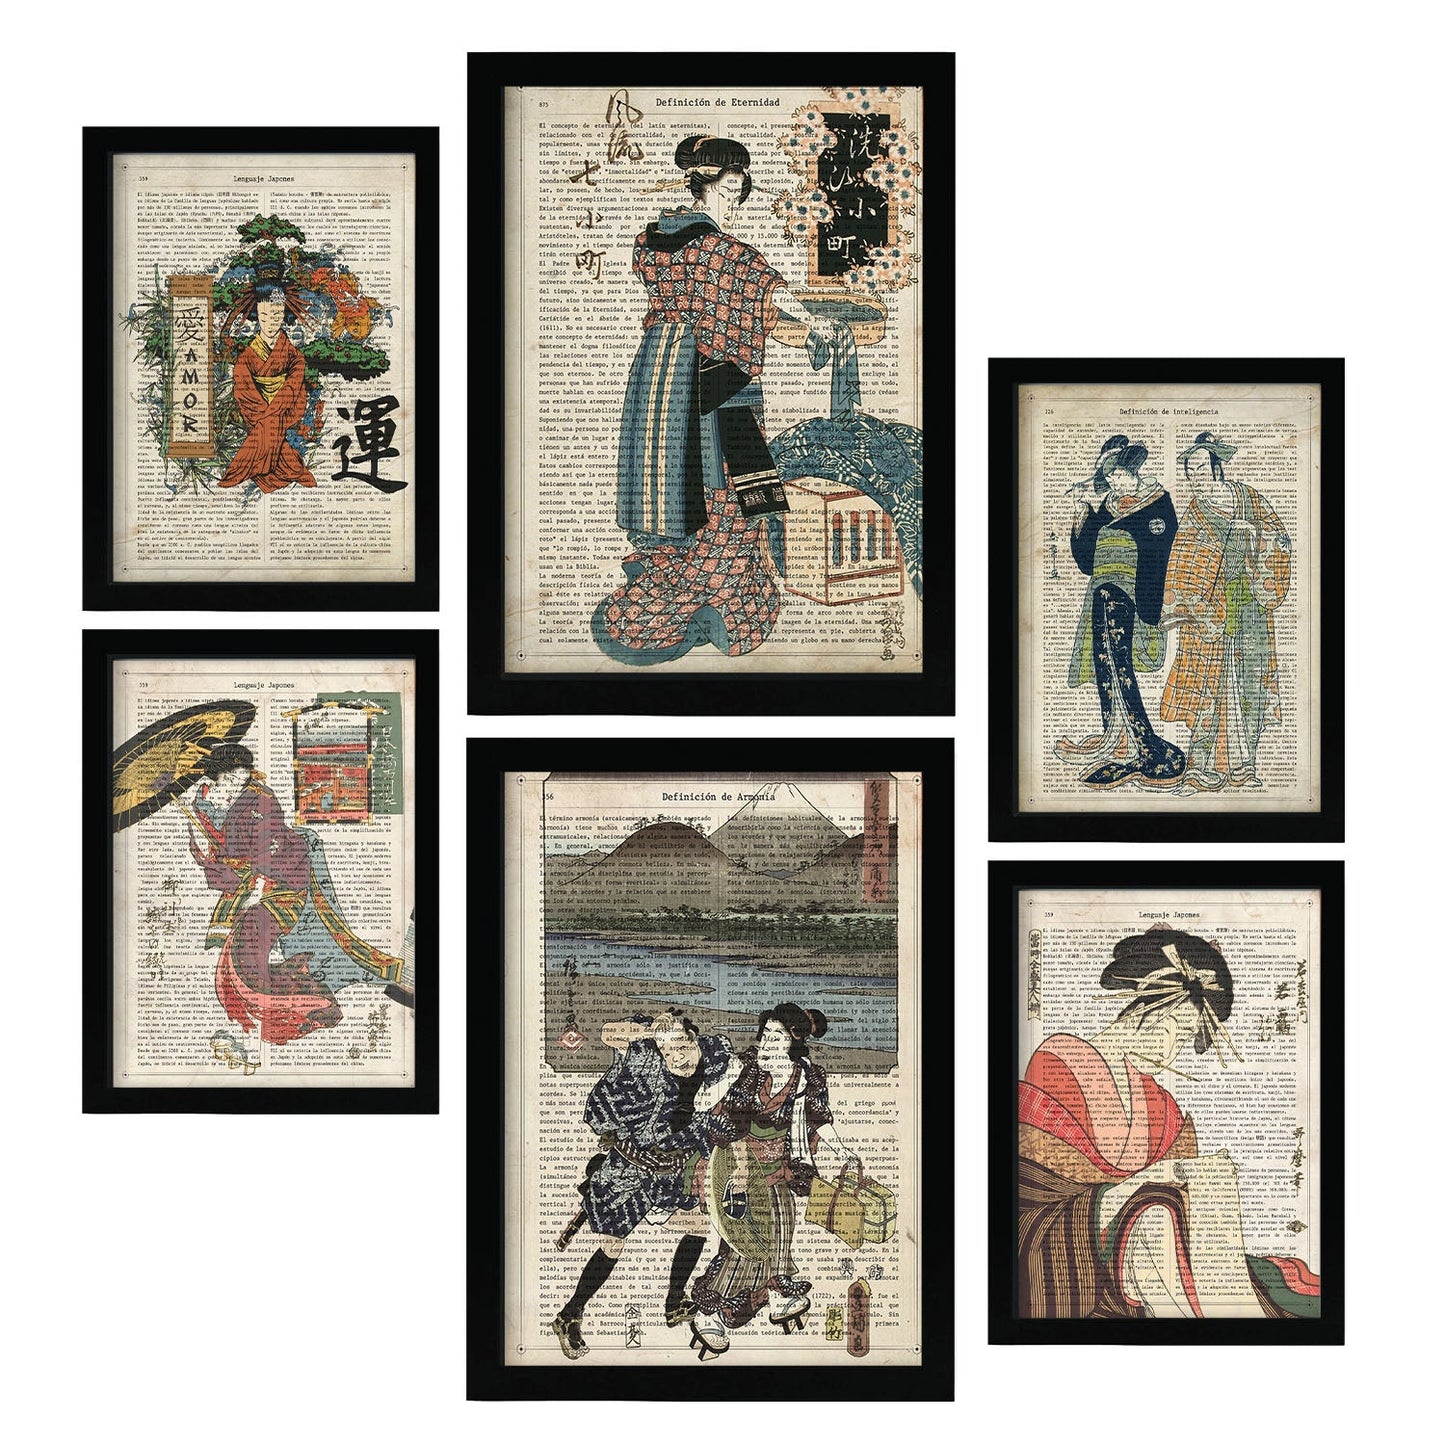 Nacnic japon. Aesthetic Wall Art Prints for Bedroom or Living Room Design.